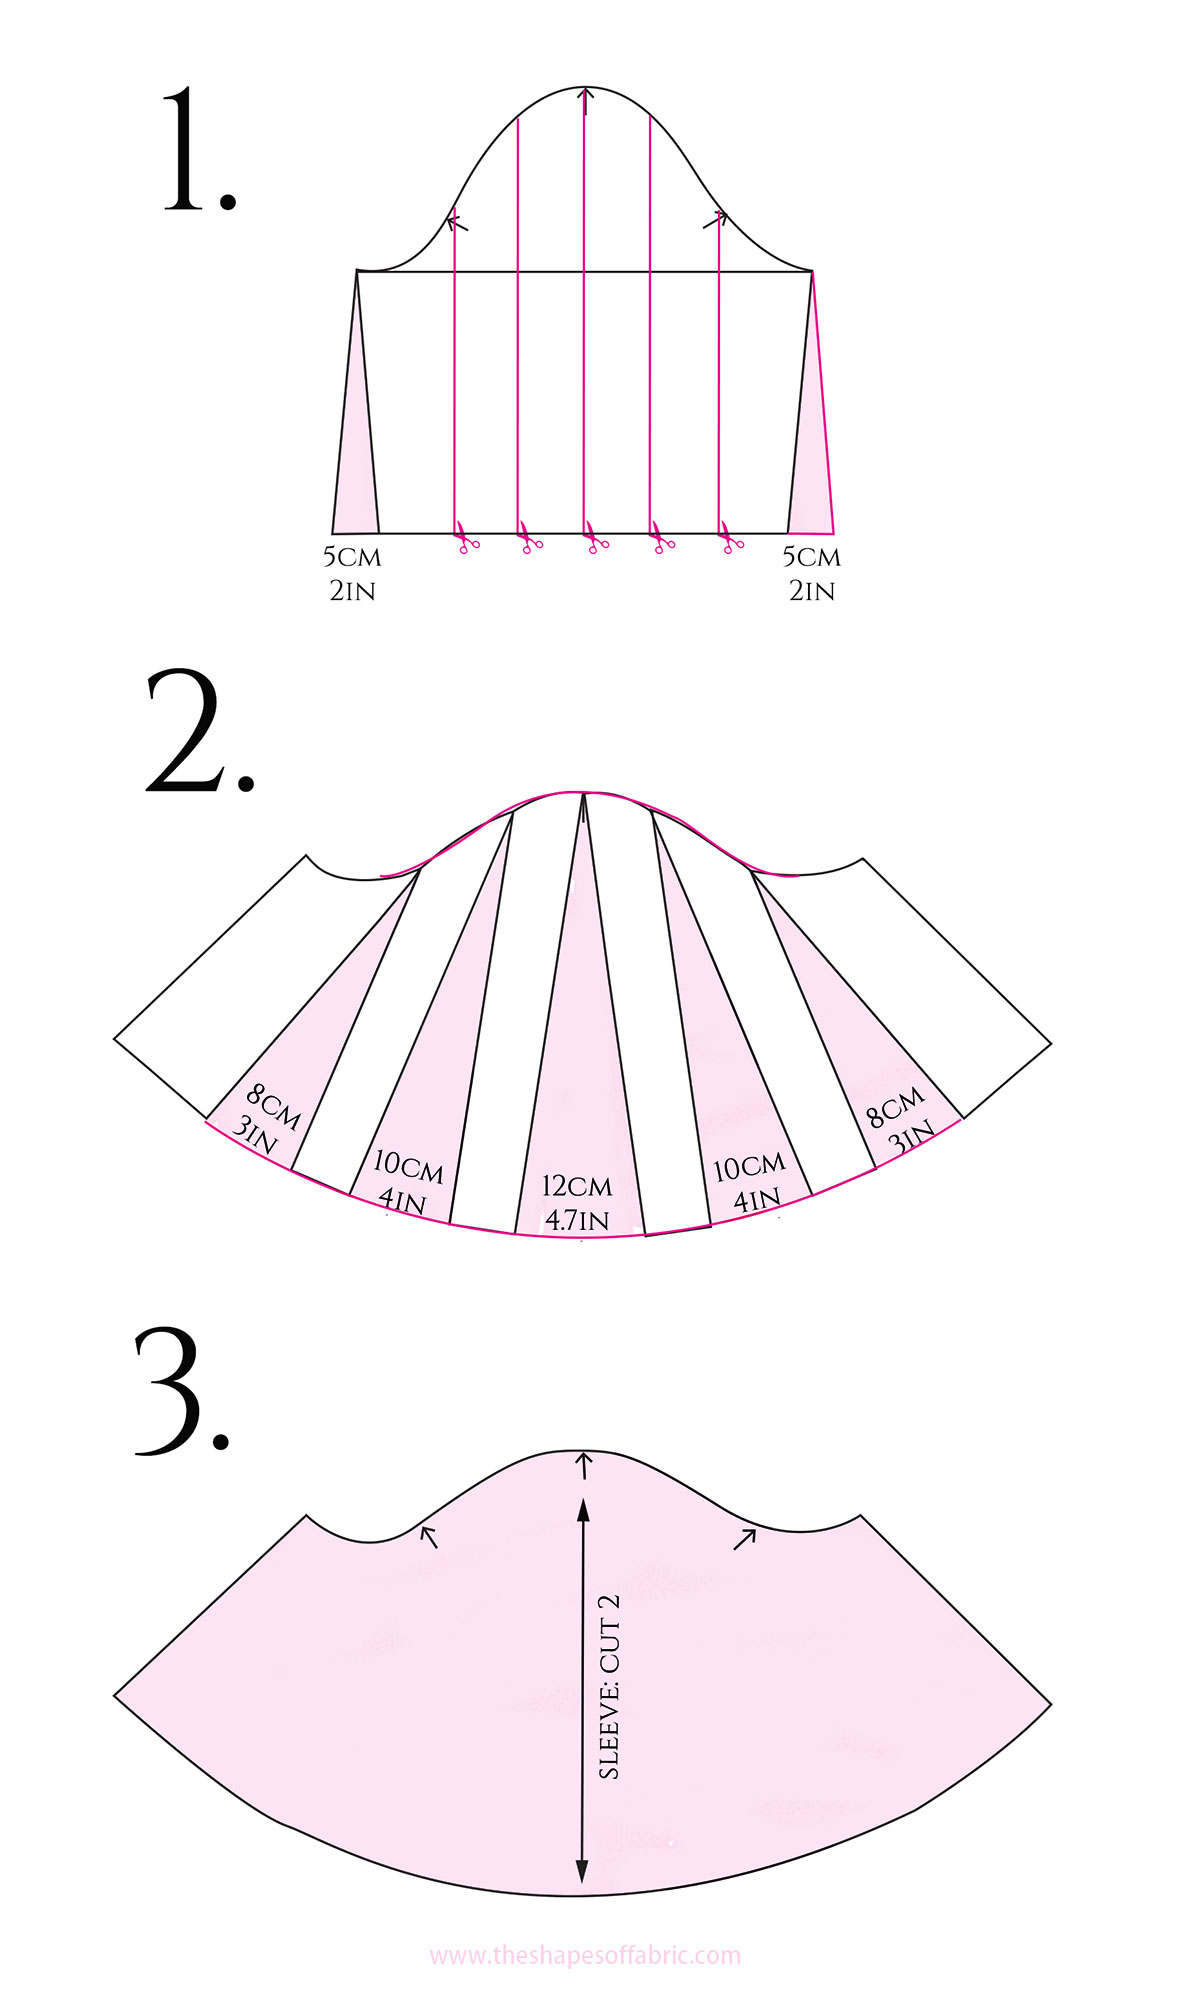 flutter-sleeve-pattern-1 - The Shapes of Fabric